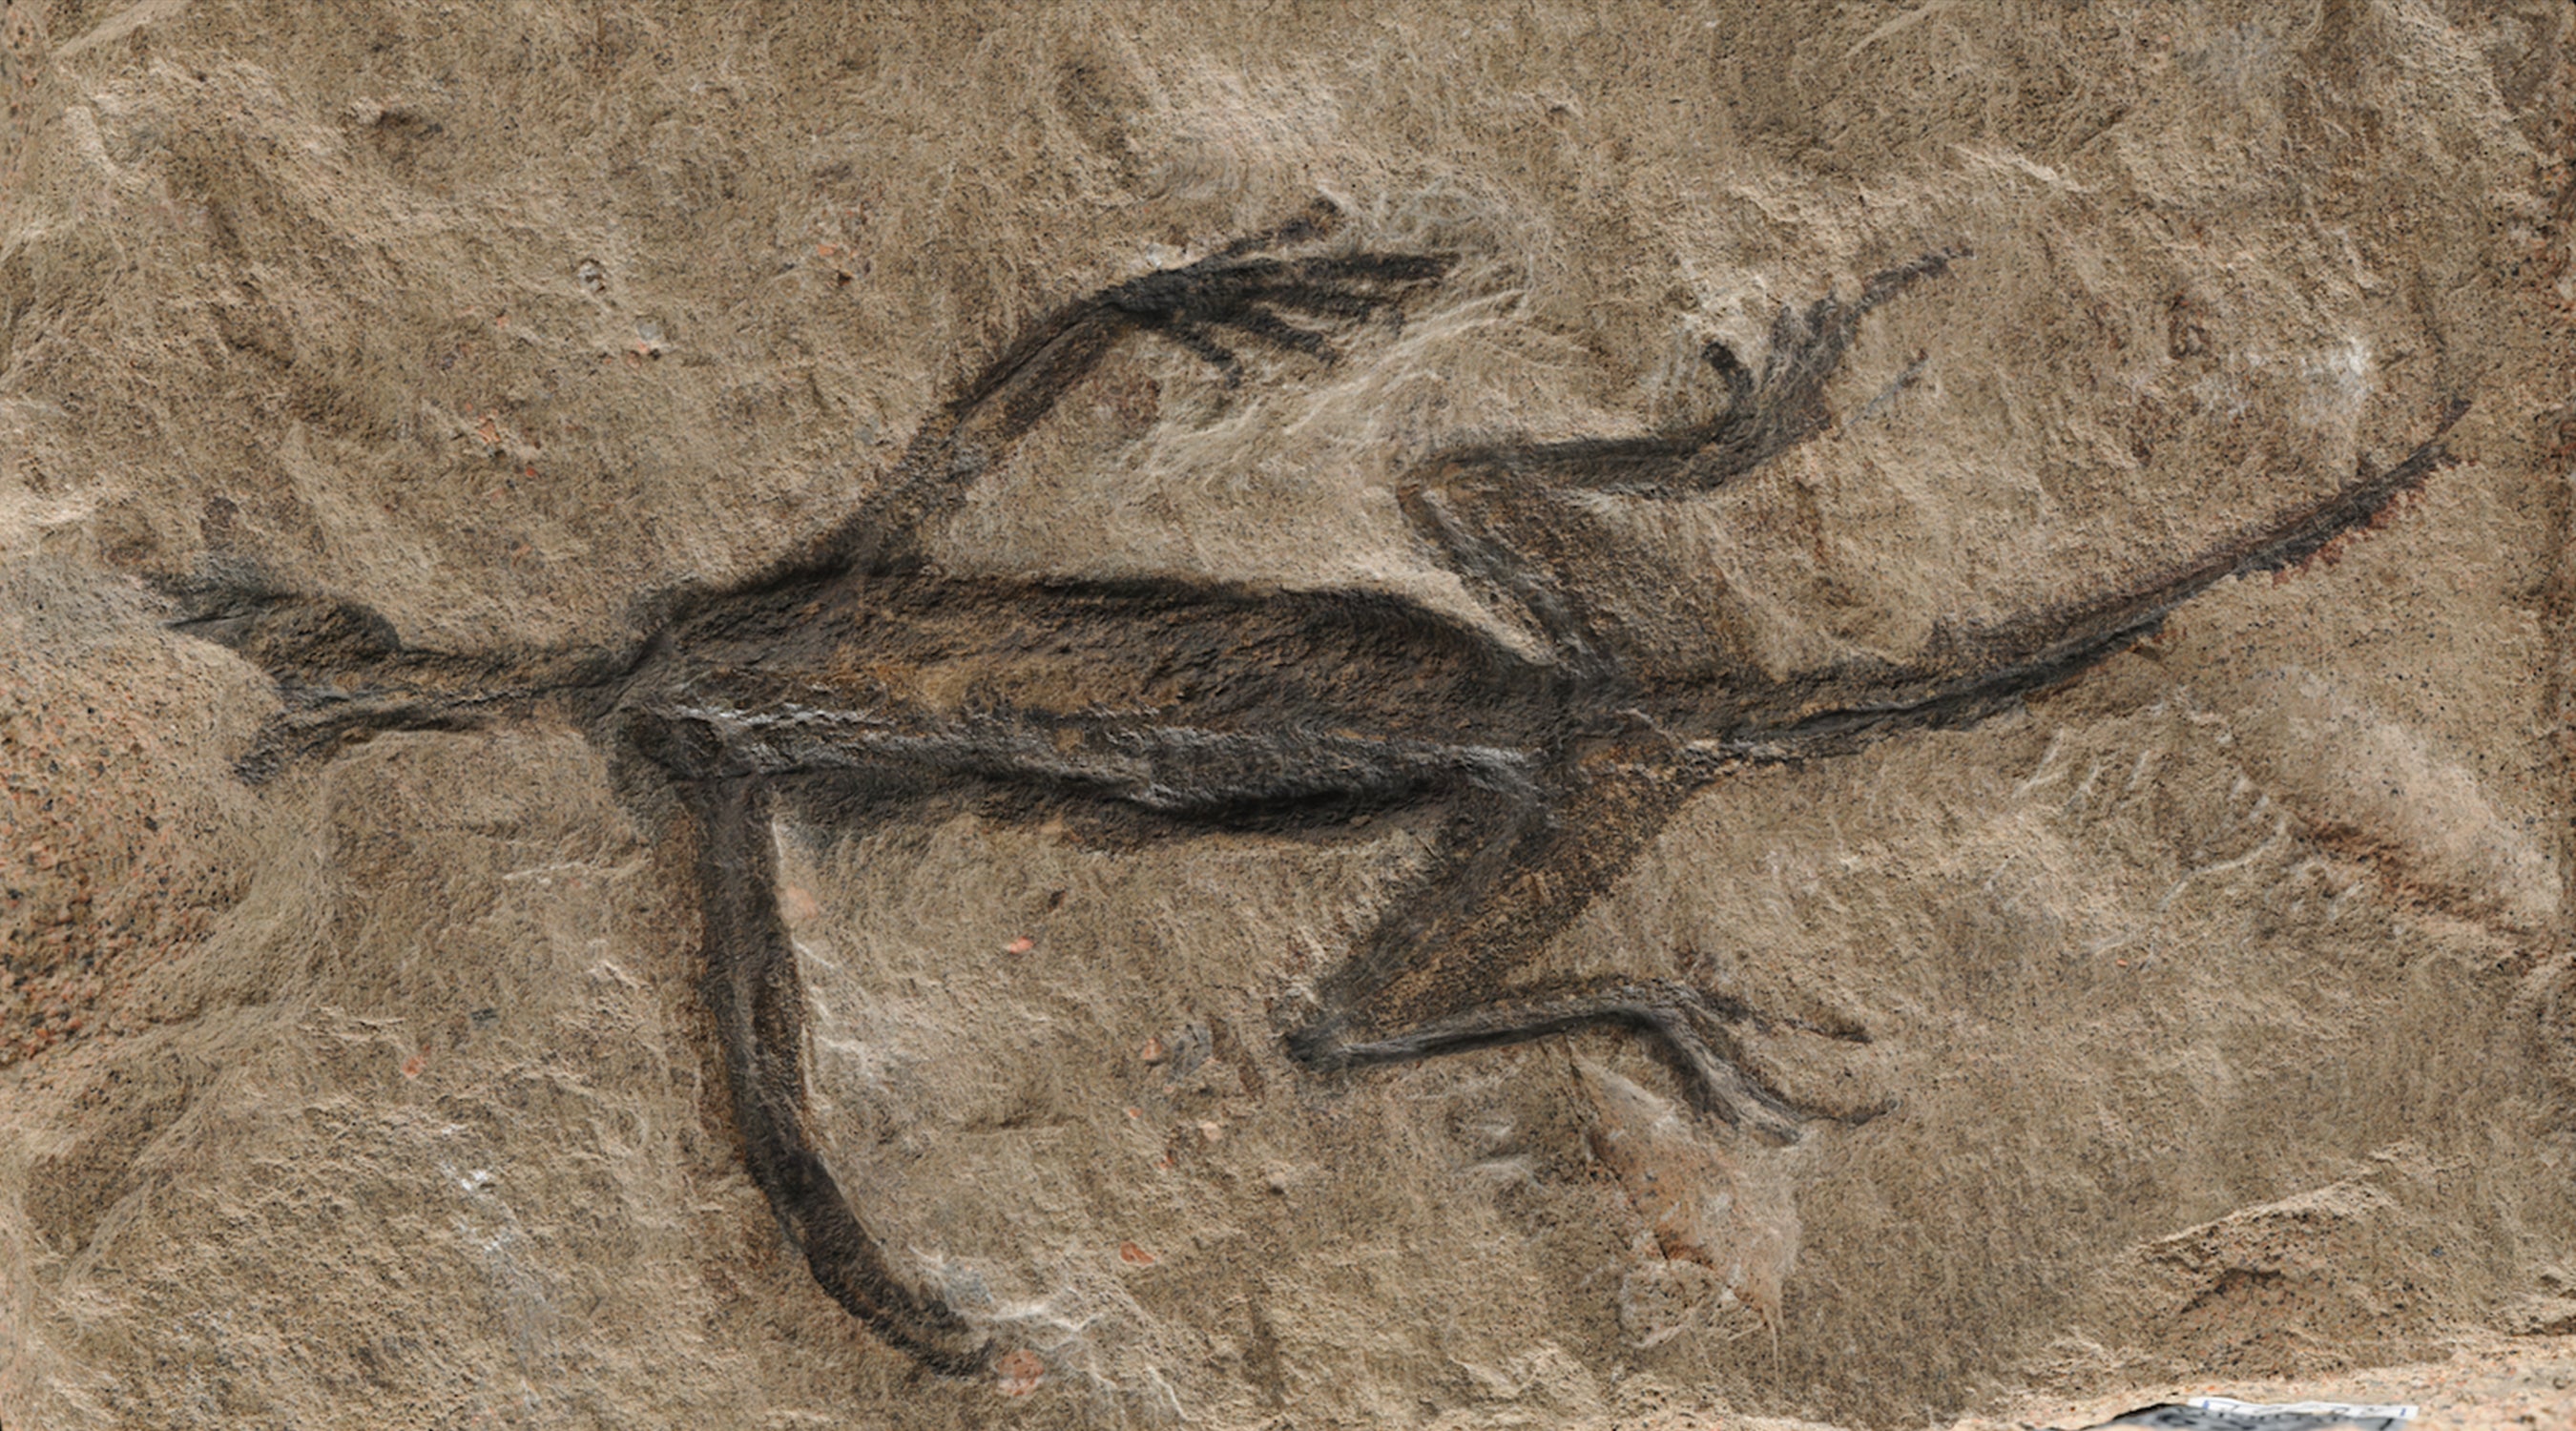 This Treasured Fossil Turns Out to Be a Forgery